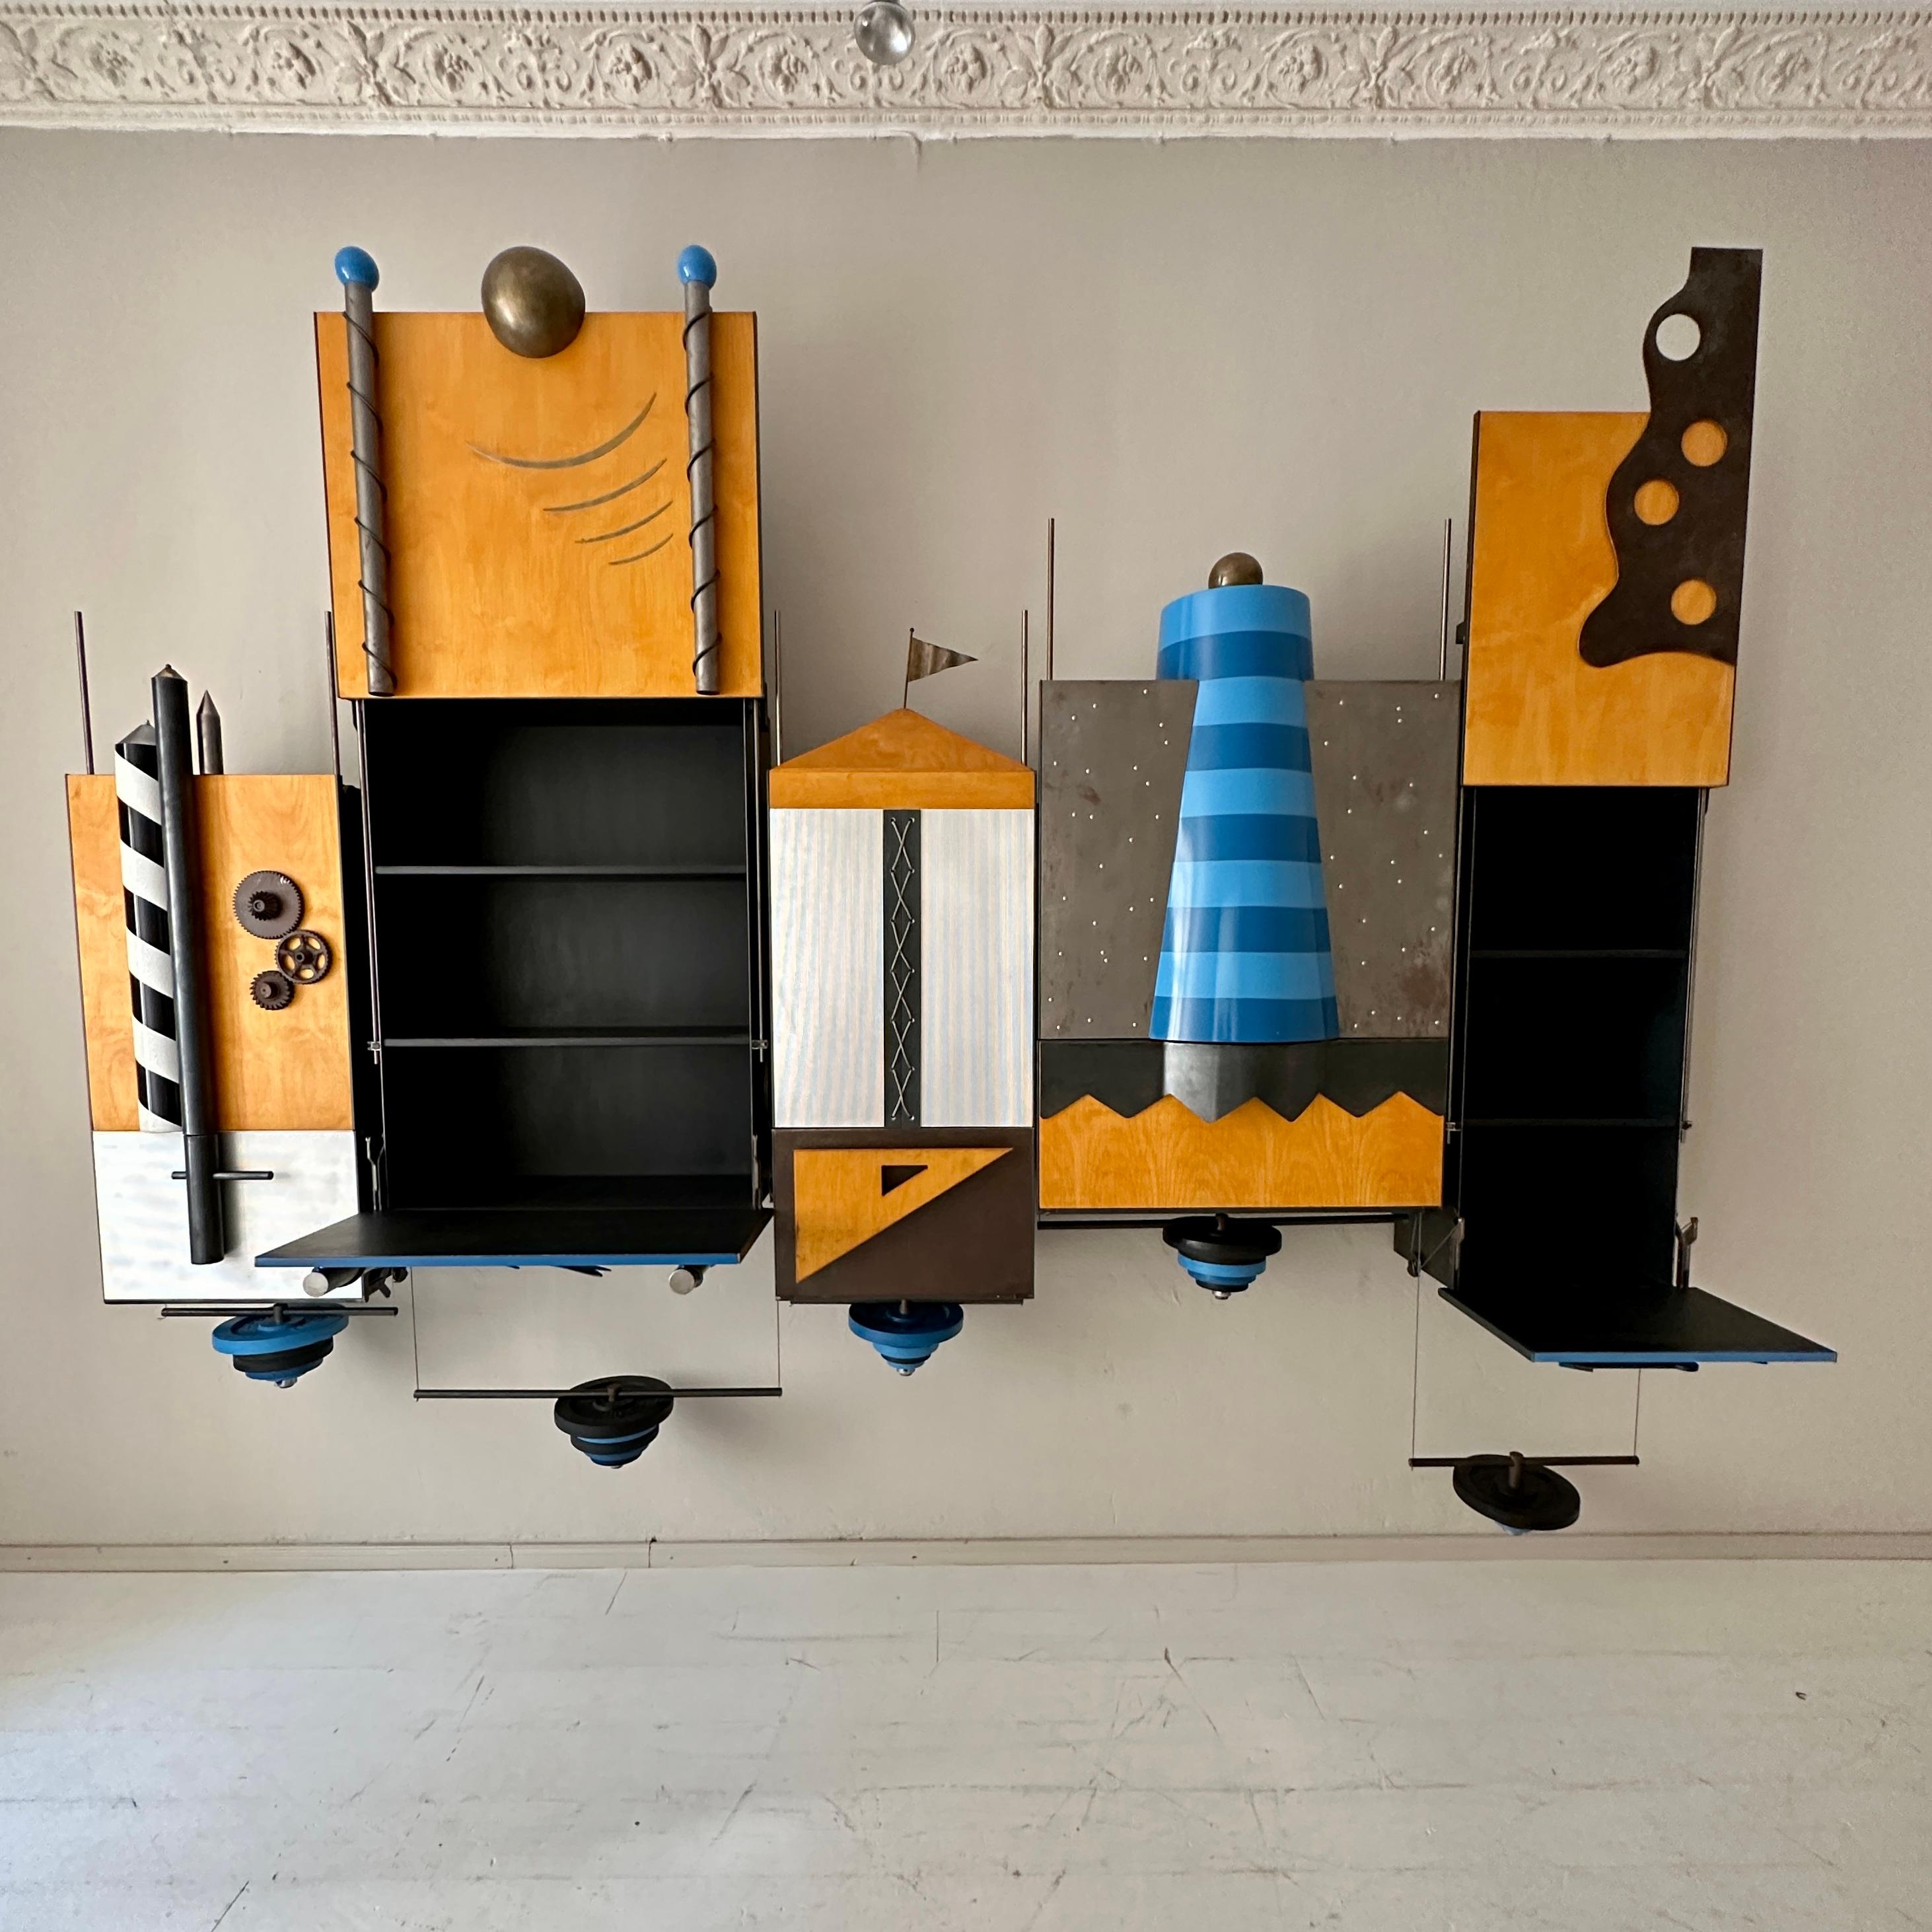 This 1980s Post-Modern One of a Kind Big Wall-Unit was made in 
metal, lacquered plywood, brass and lacquered plastic.
It is in blue, white, black and ocher beige.
The fantastic mechanism with the gym weights makes it super easy to open 1 of the 5